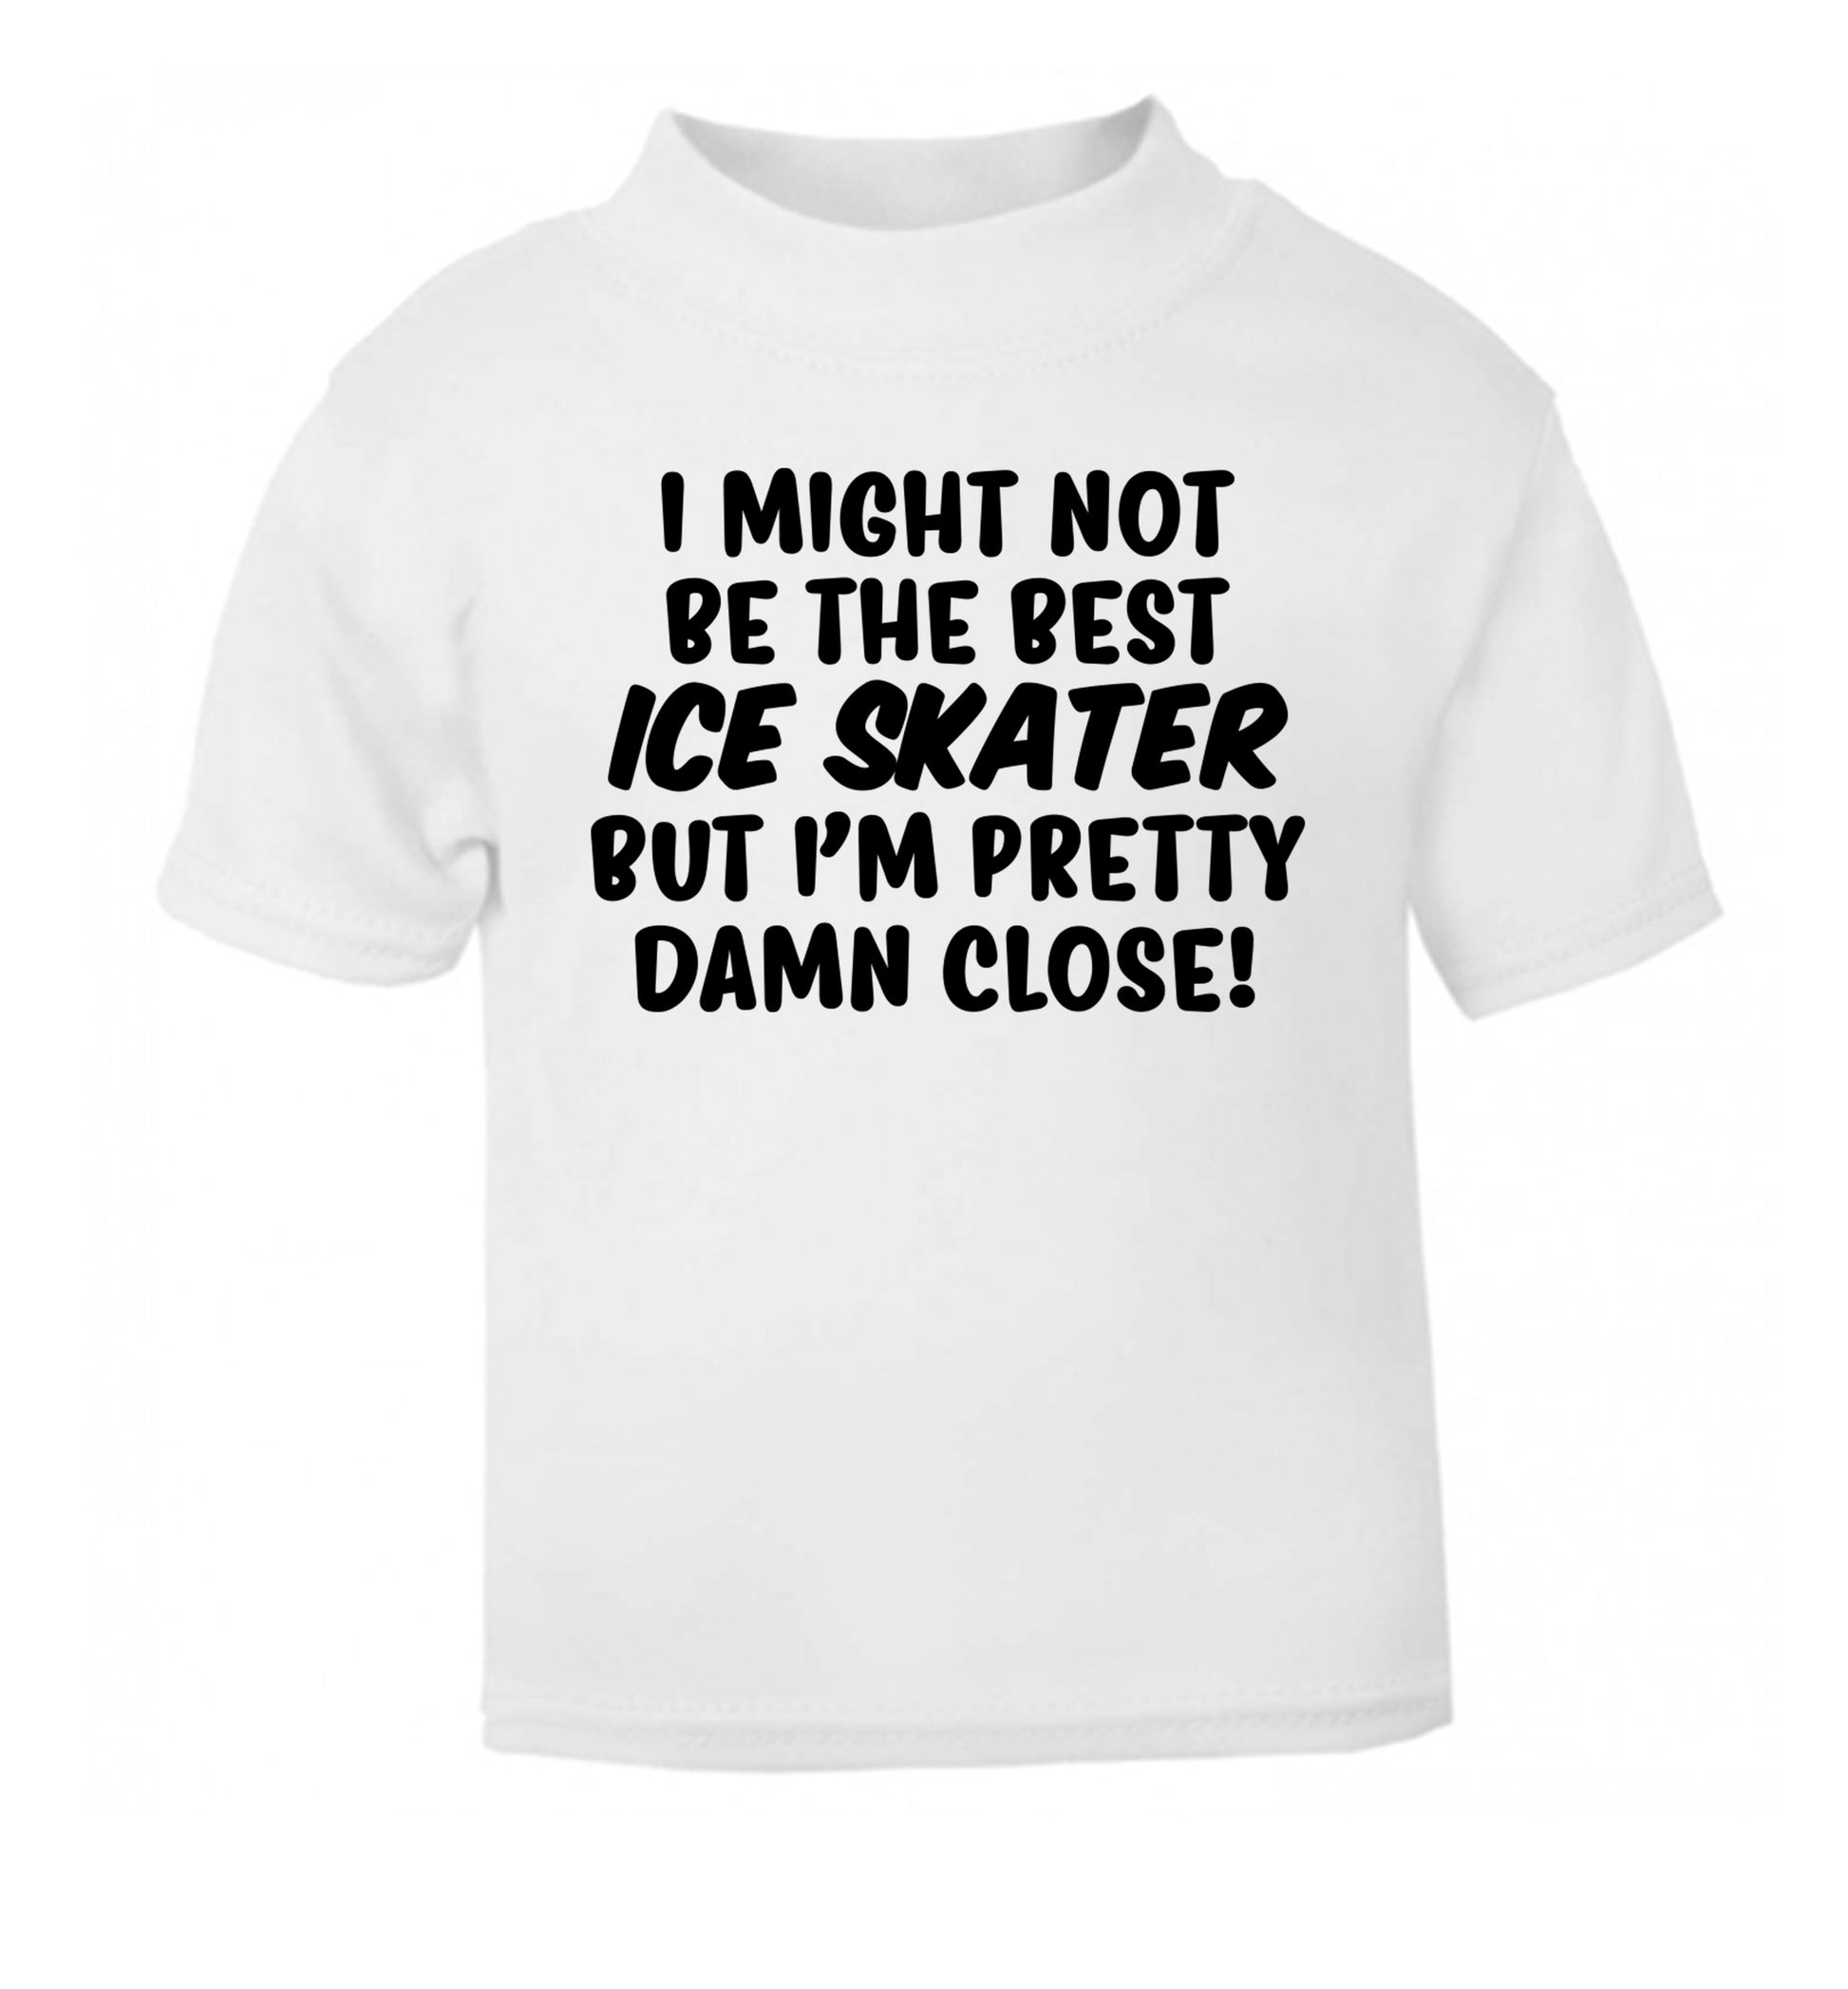 I might not be the best ice skater but I'm pretty damn close! white Baby Toddler Tshirt 2 Years